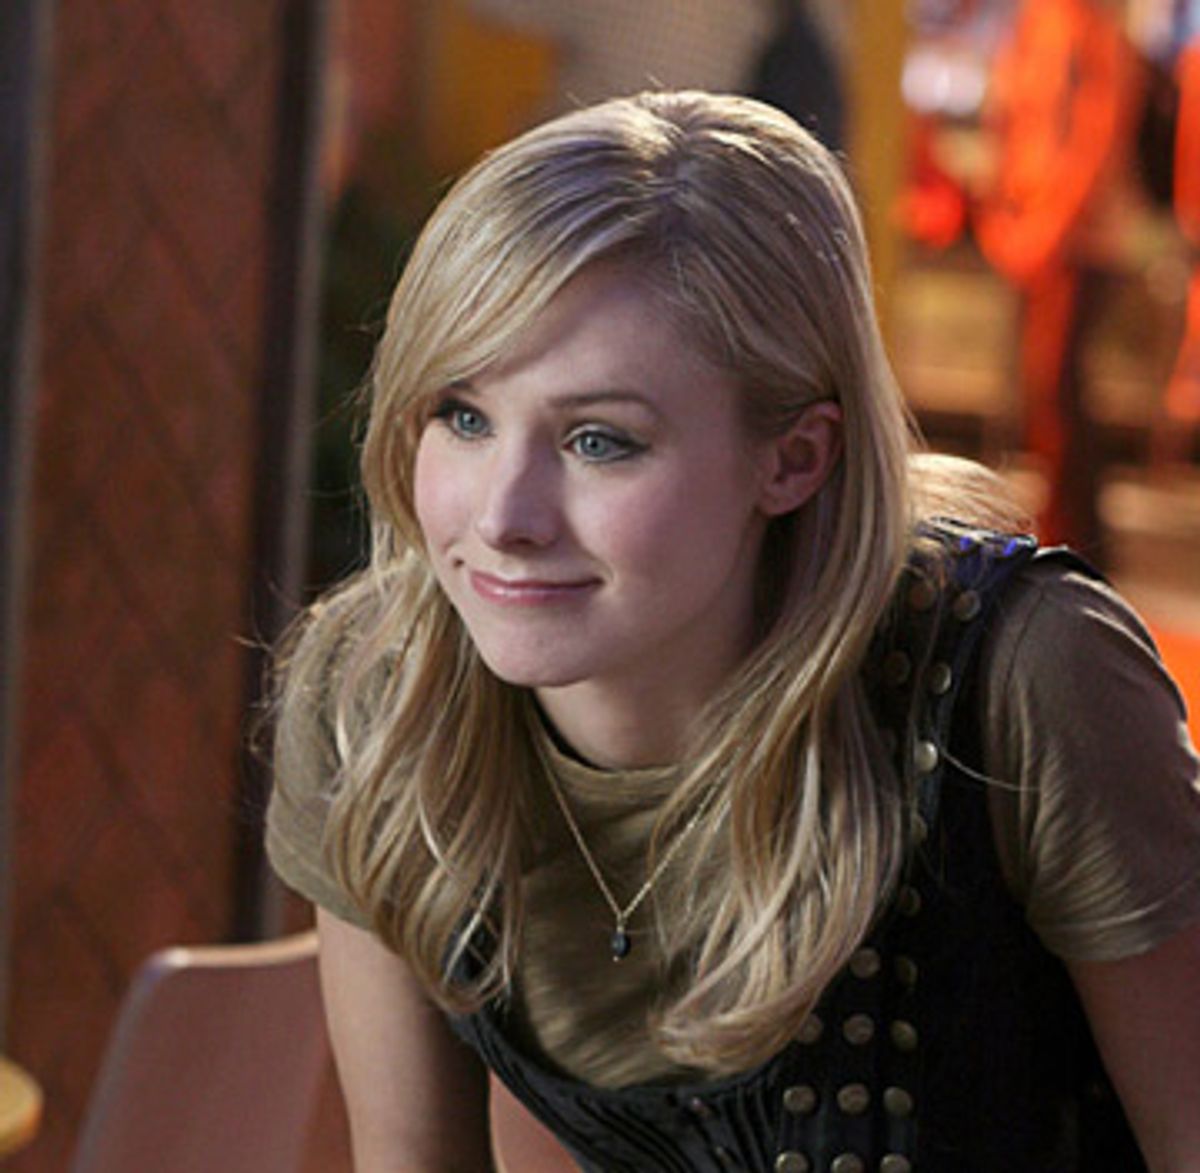 7 'Veronica Mars' Alums We're Still Hoping Will Join the Hulu Revival